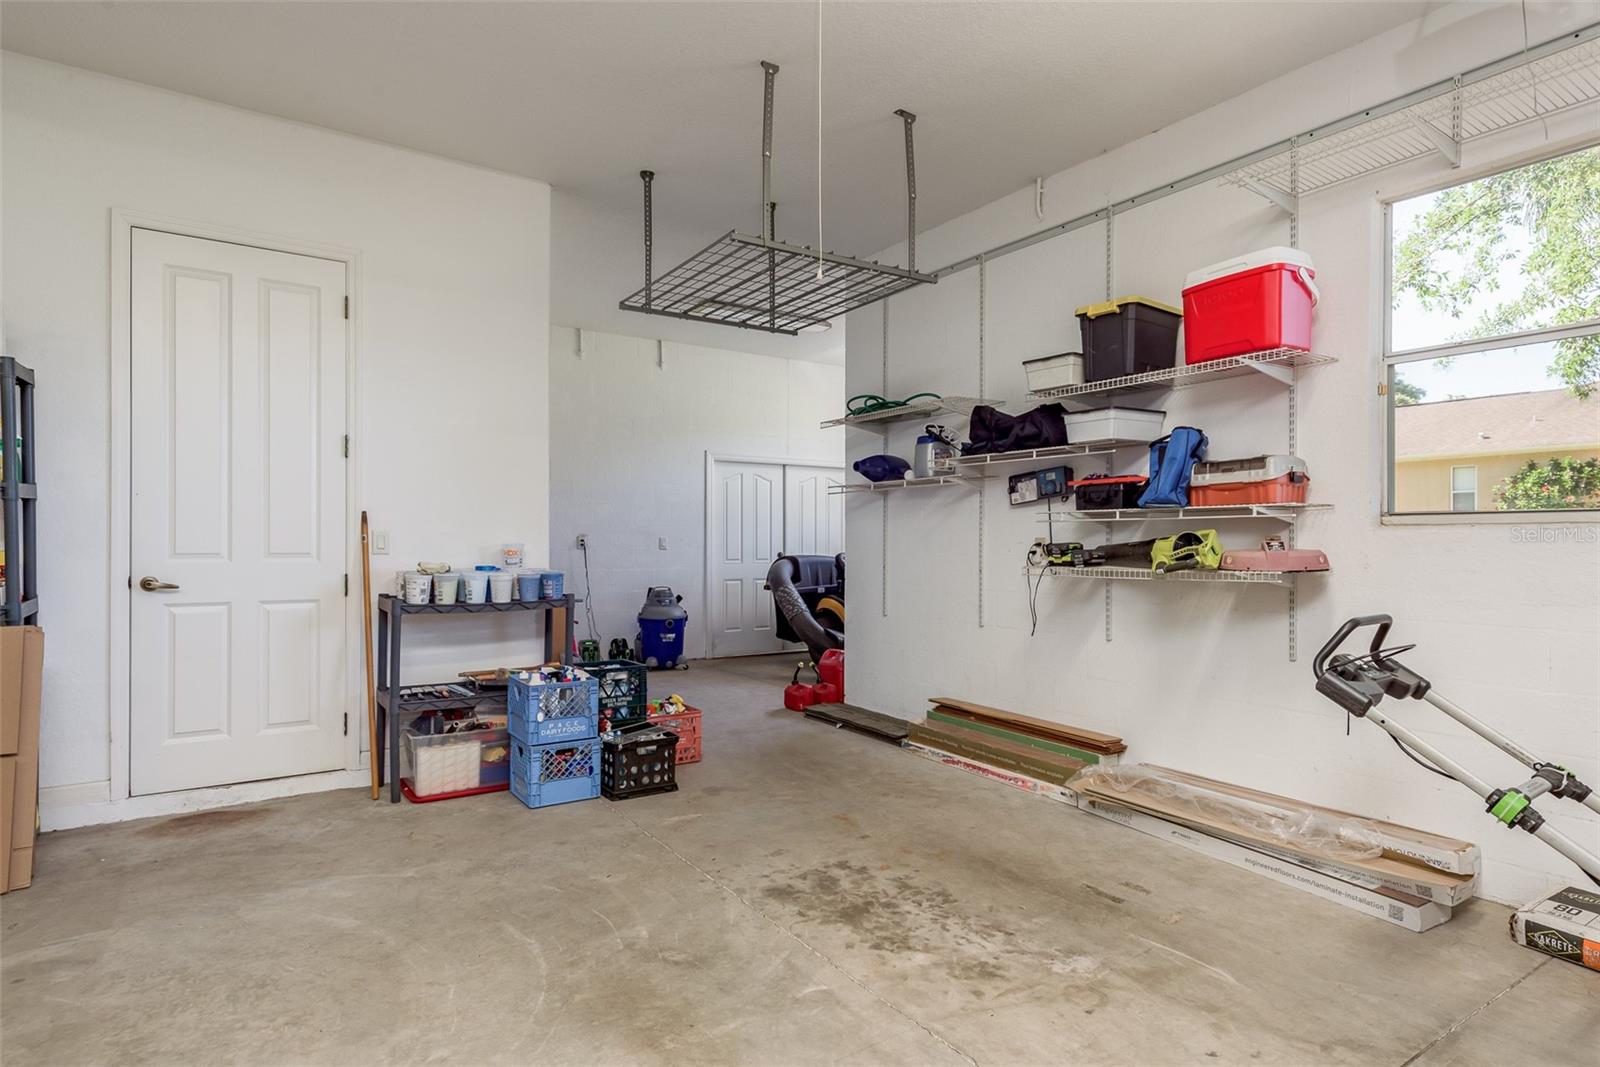 Storage area for Lawn Equipment